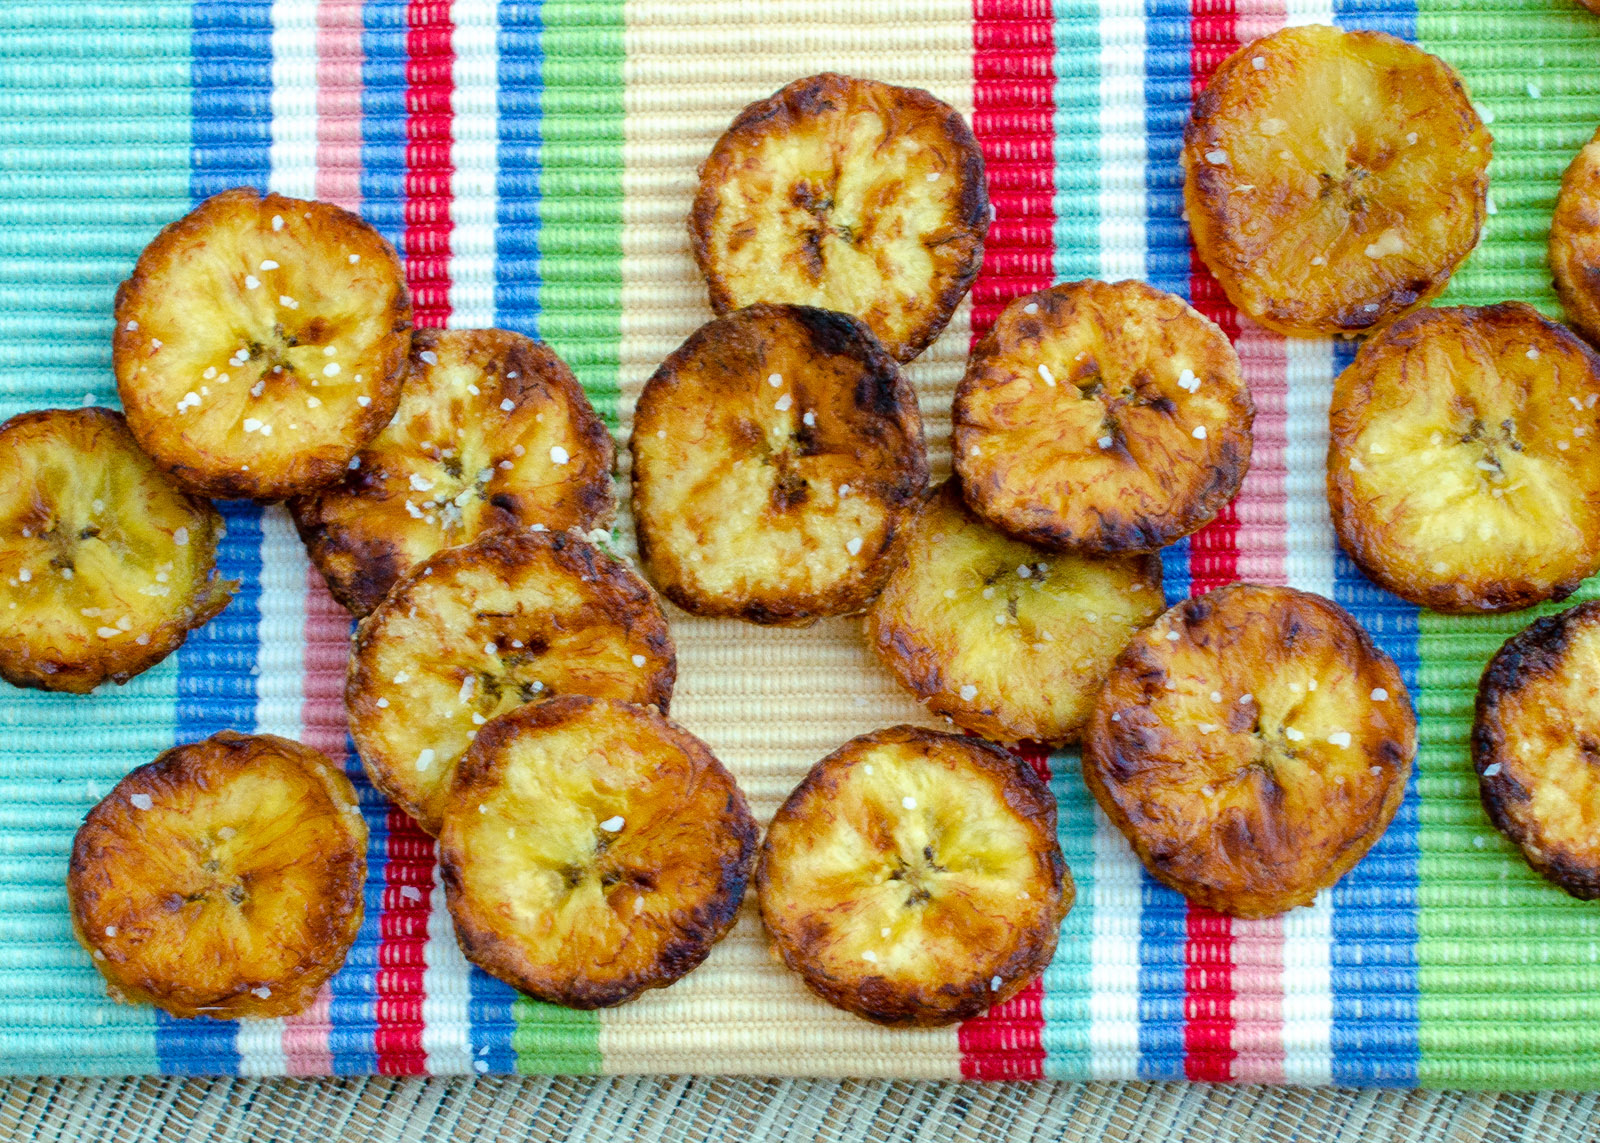  fried plantain slices on a colored background